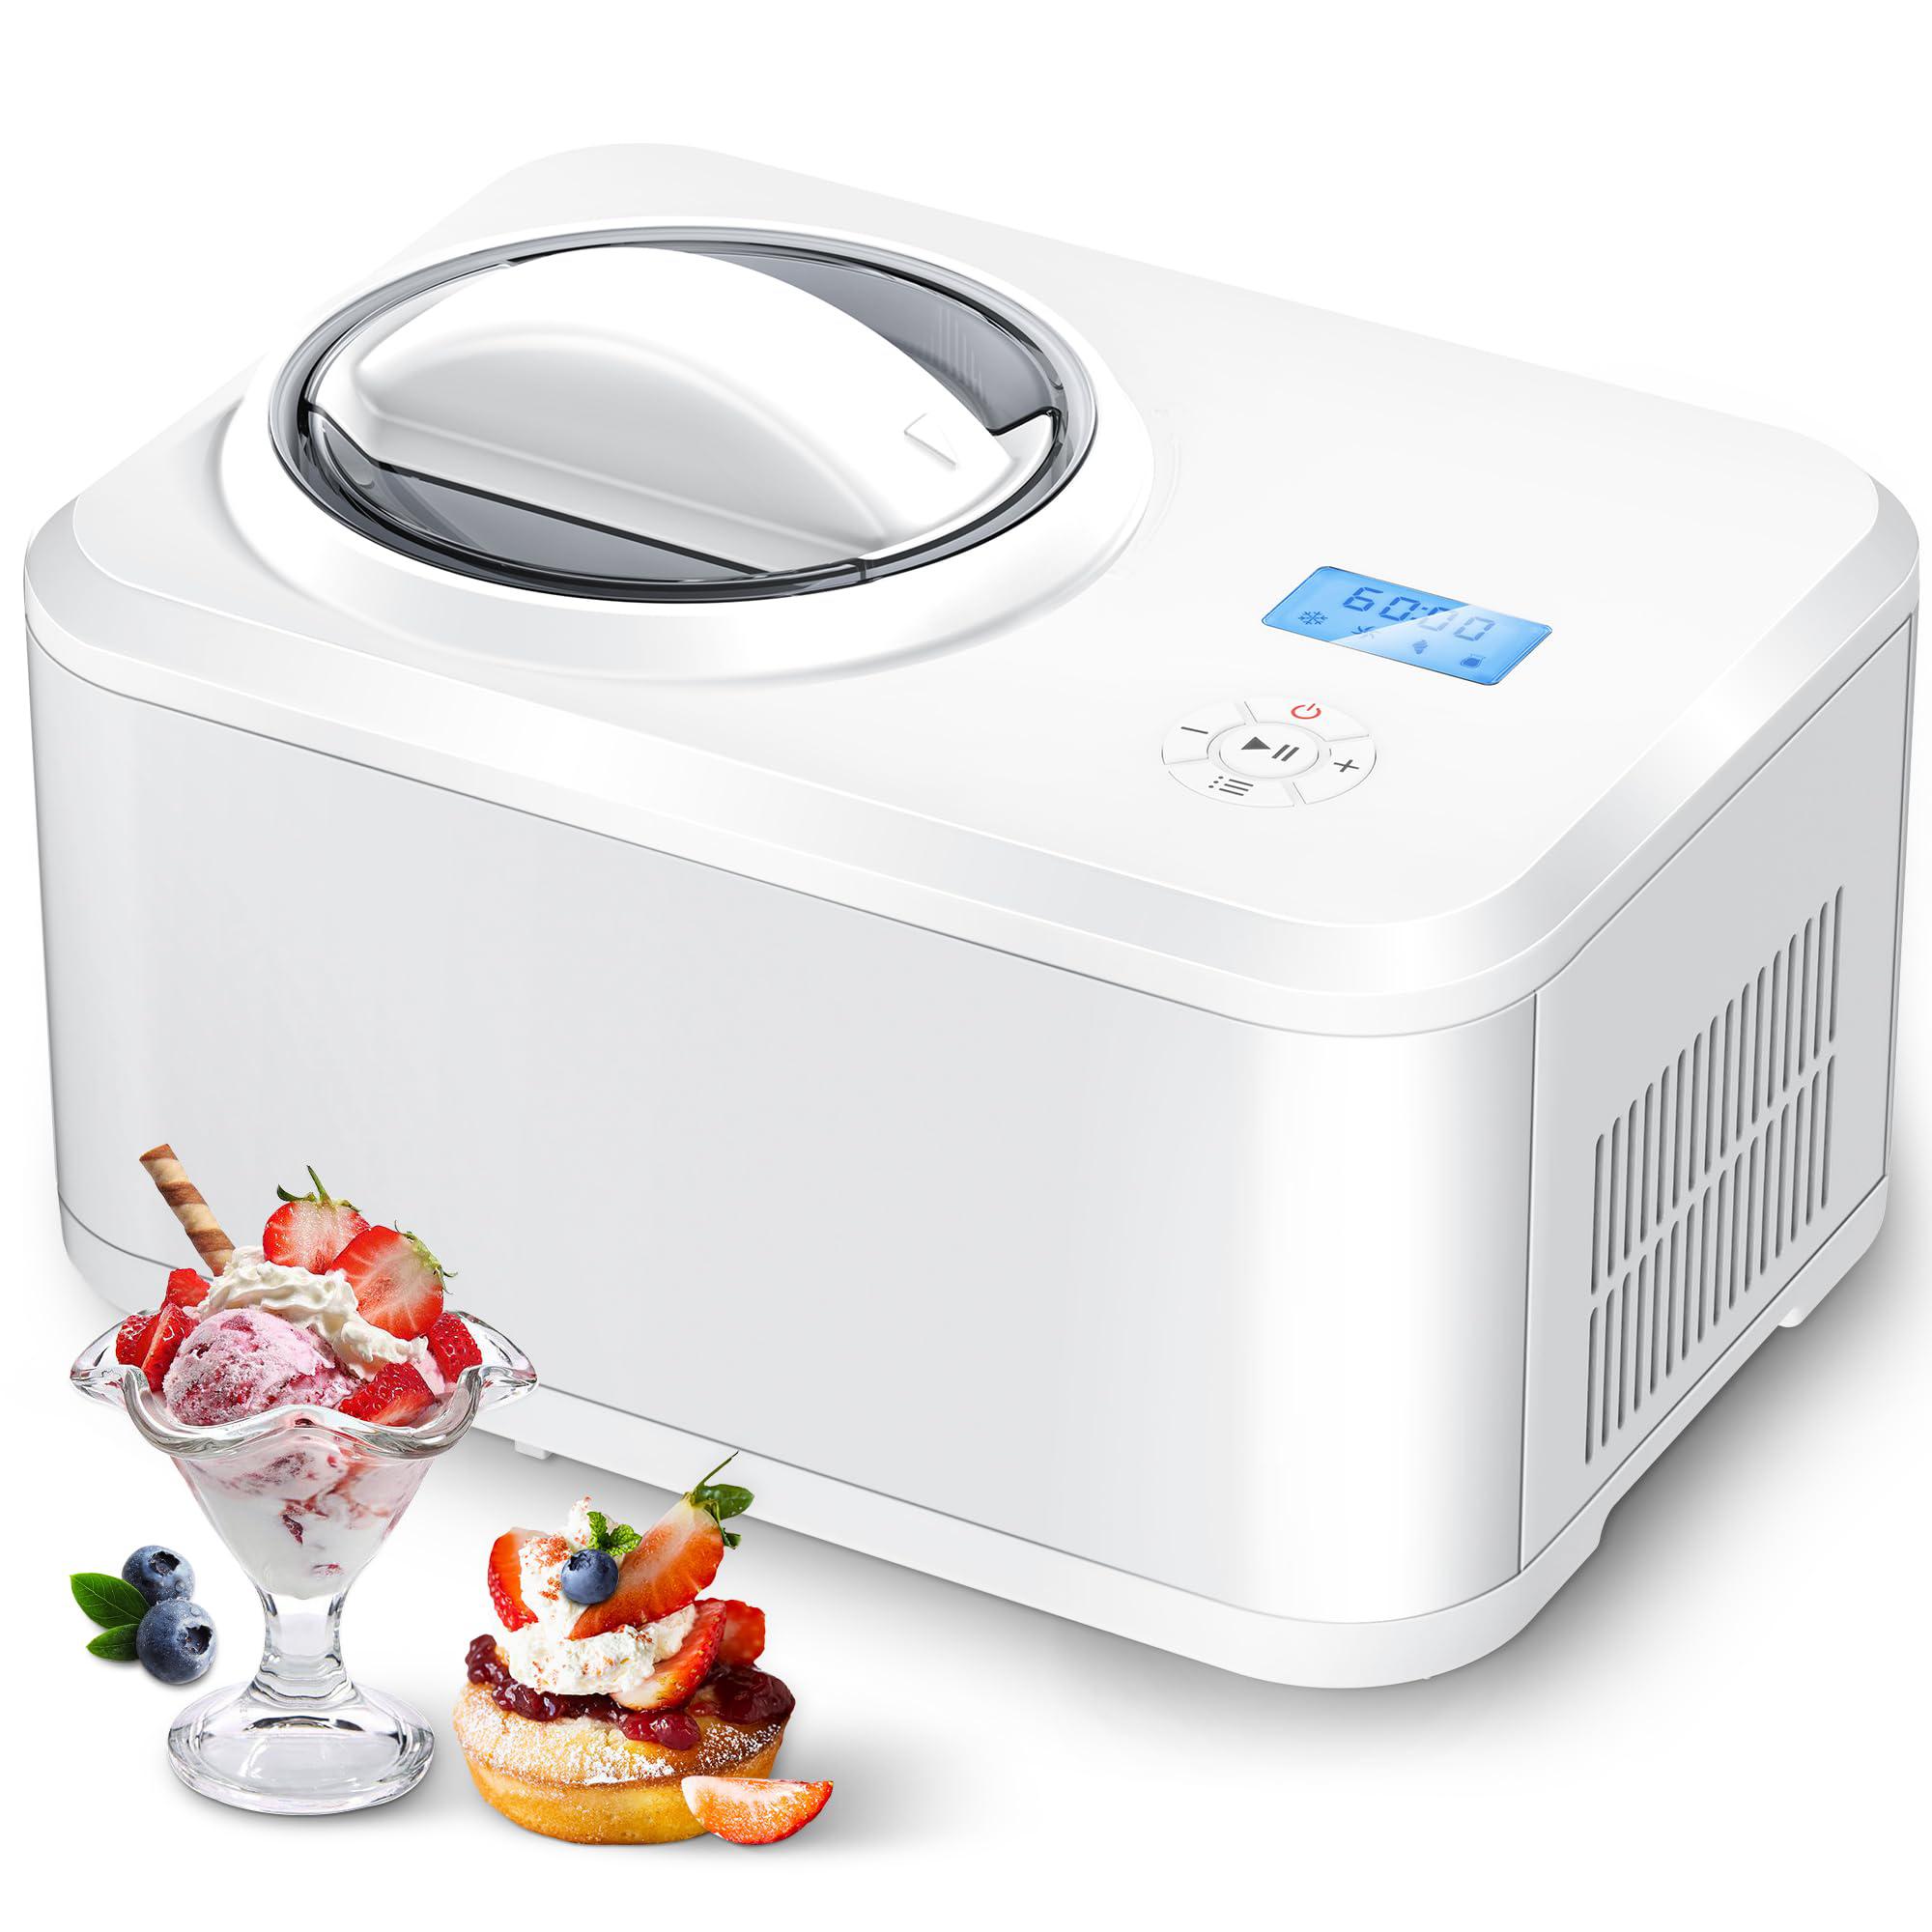 cowsar 1.6 quarts automatic ice cream maker with built-in compressor, no pre-freezing, fruit yogurt machine with lcd display 